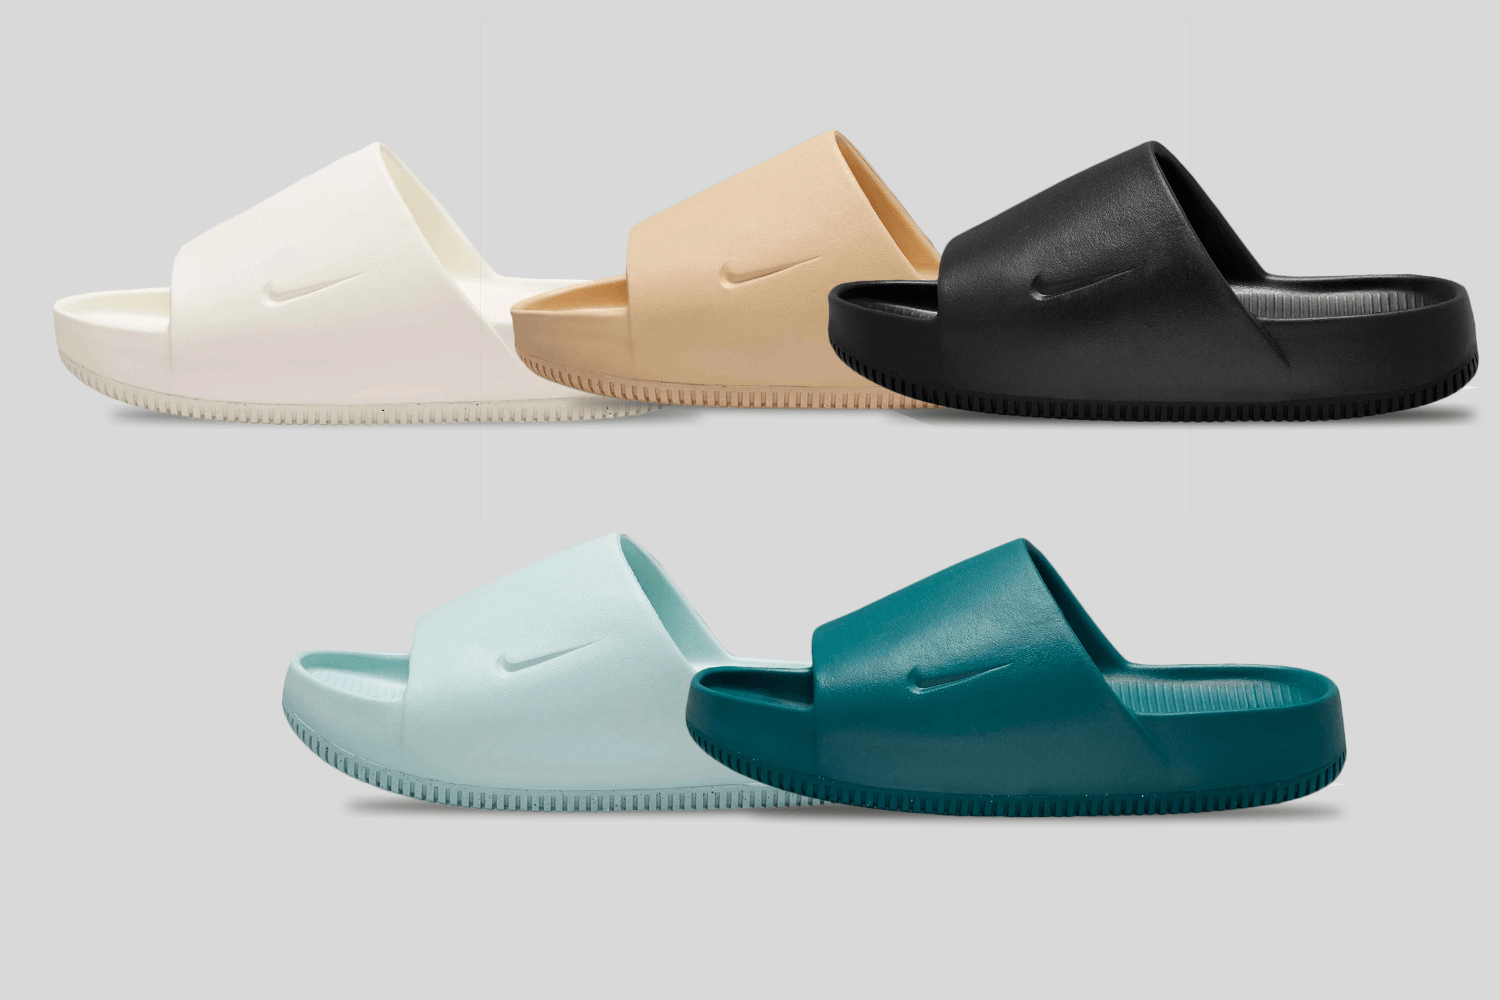 Nike is releasing the new Calm Slides with a chunky design